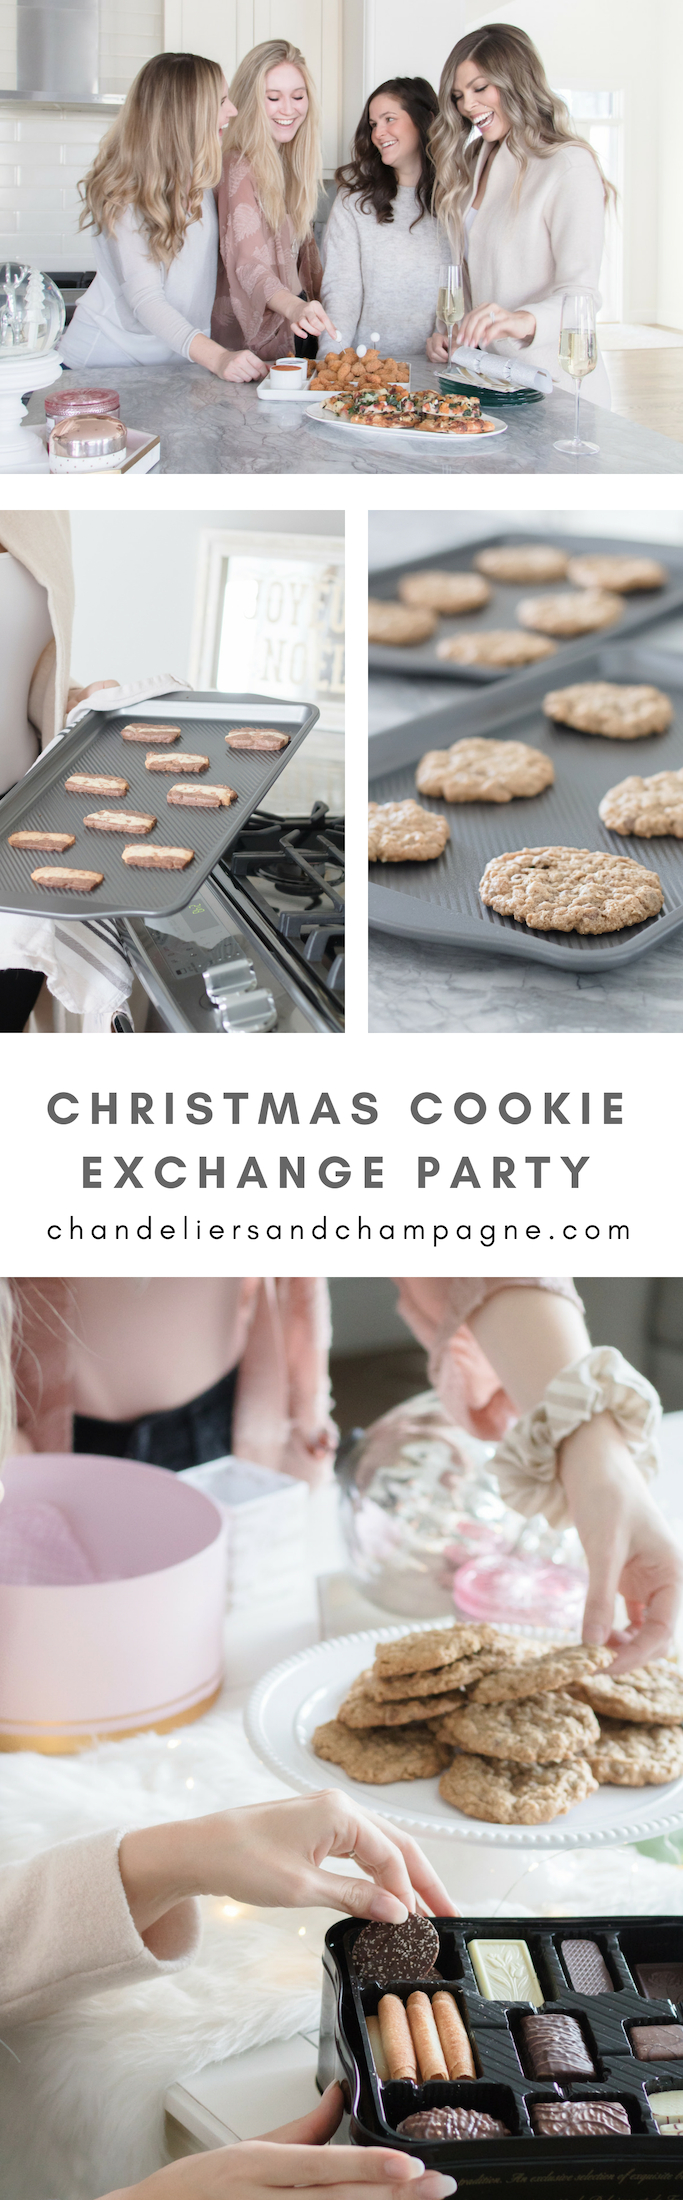 Christmas Cookie Exchange party - how to host a Christmas cookie exchange - ideas on hosting a holiday cookie exchange - Christmas baking ideas